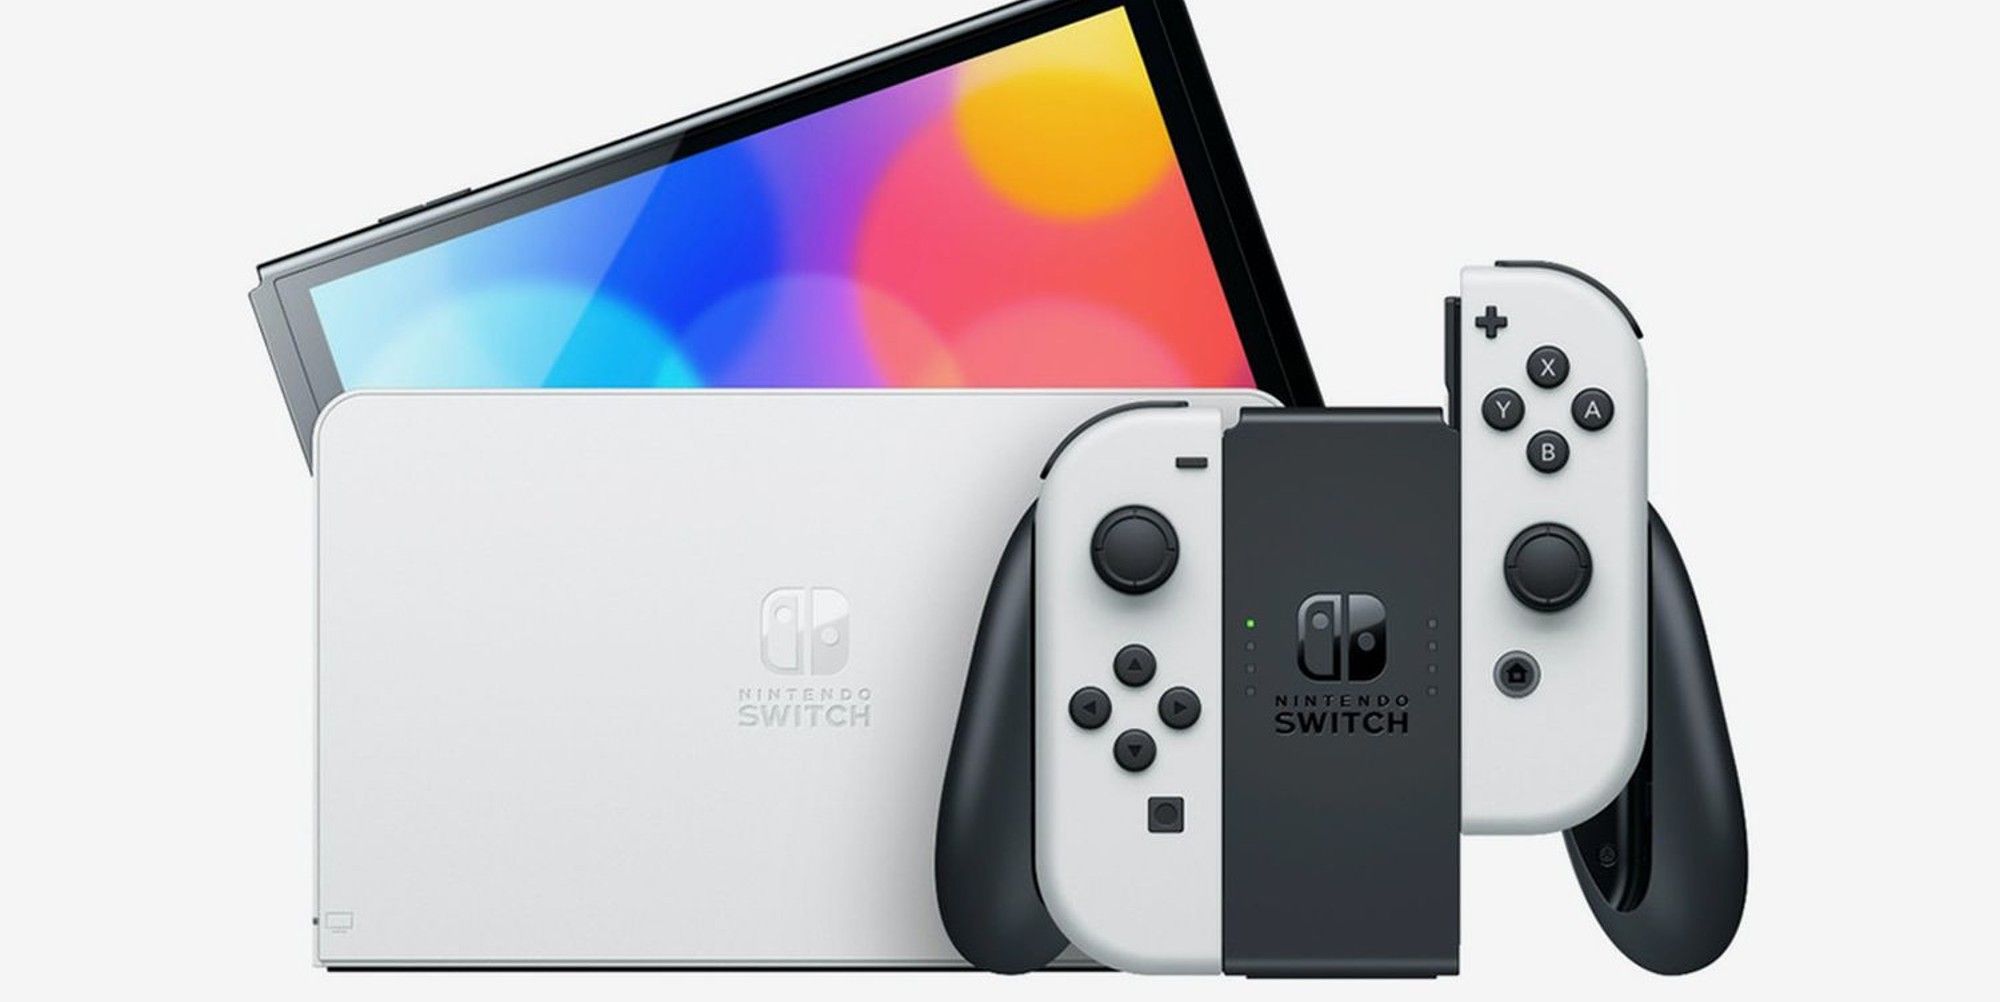 Nintendo Switch Is the Best-selling Video Game Console in November